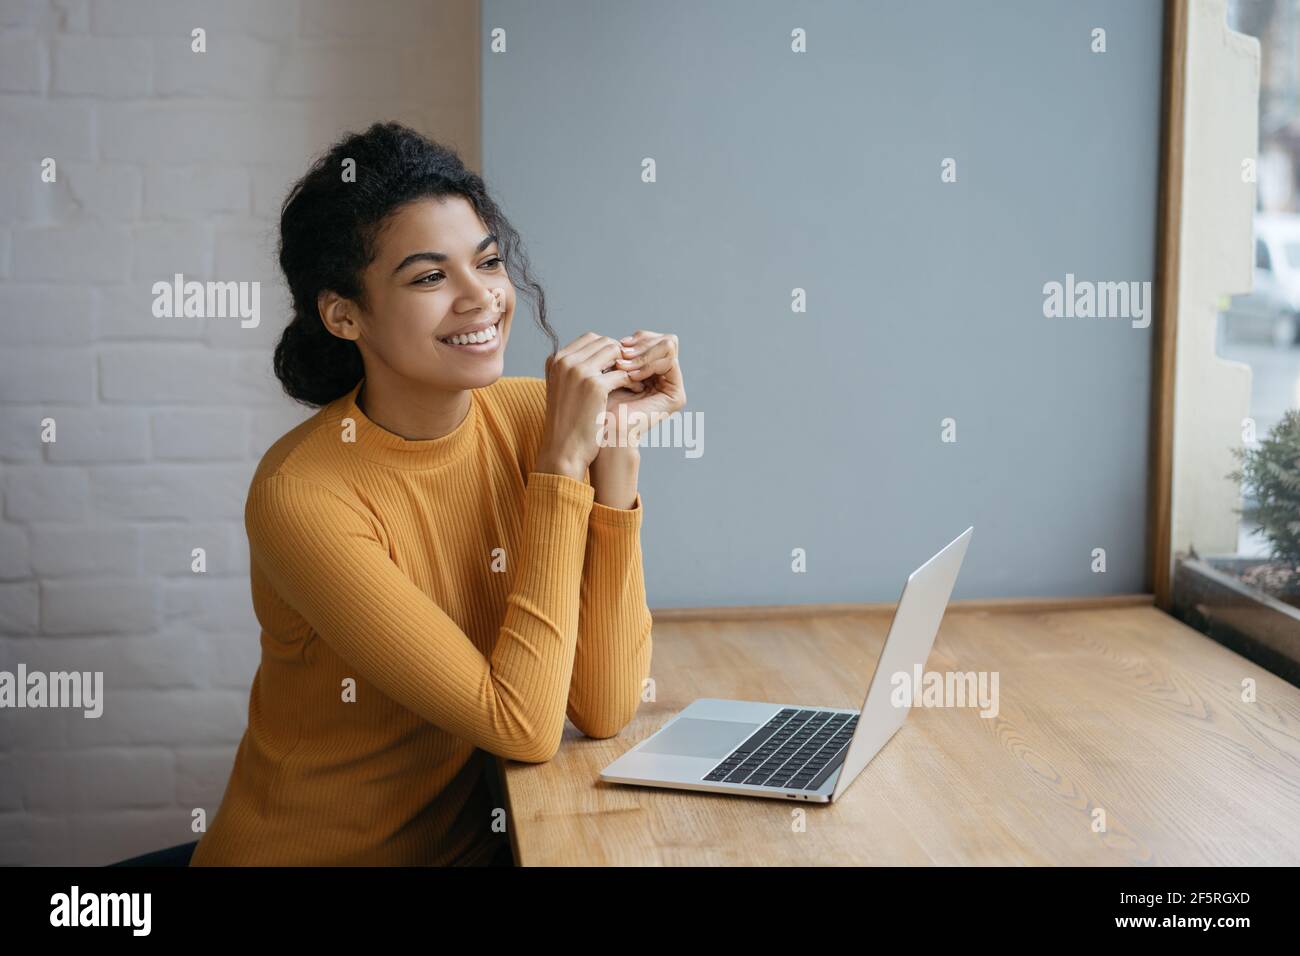 Portrait of happy copywriter using laptop computer, planning project. Smiling African American woman working from home. Successful business concept Stock Photo